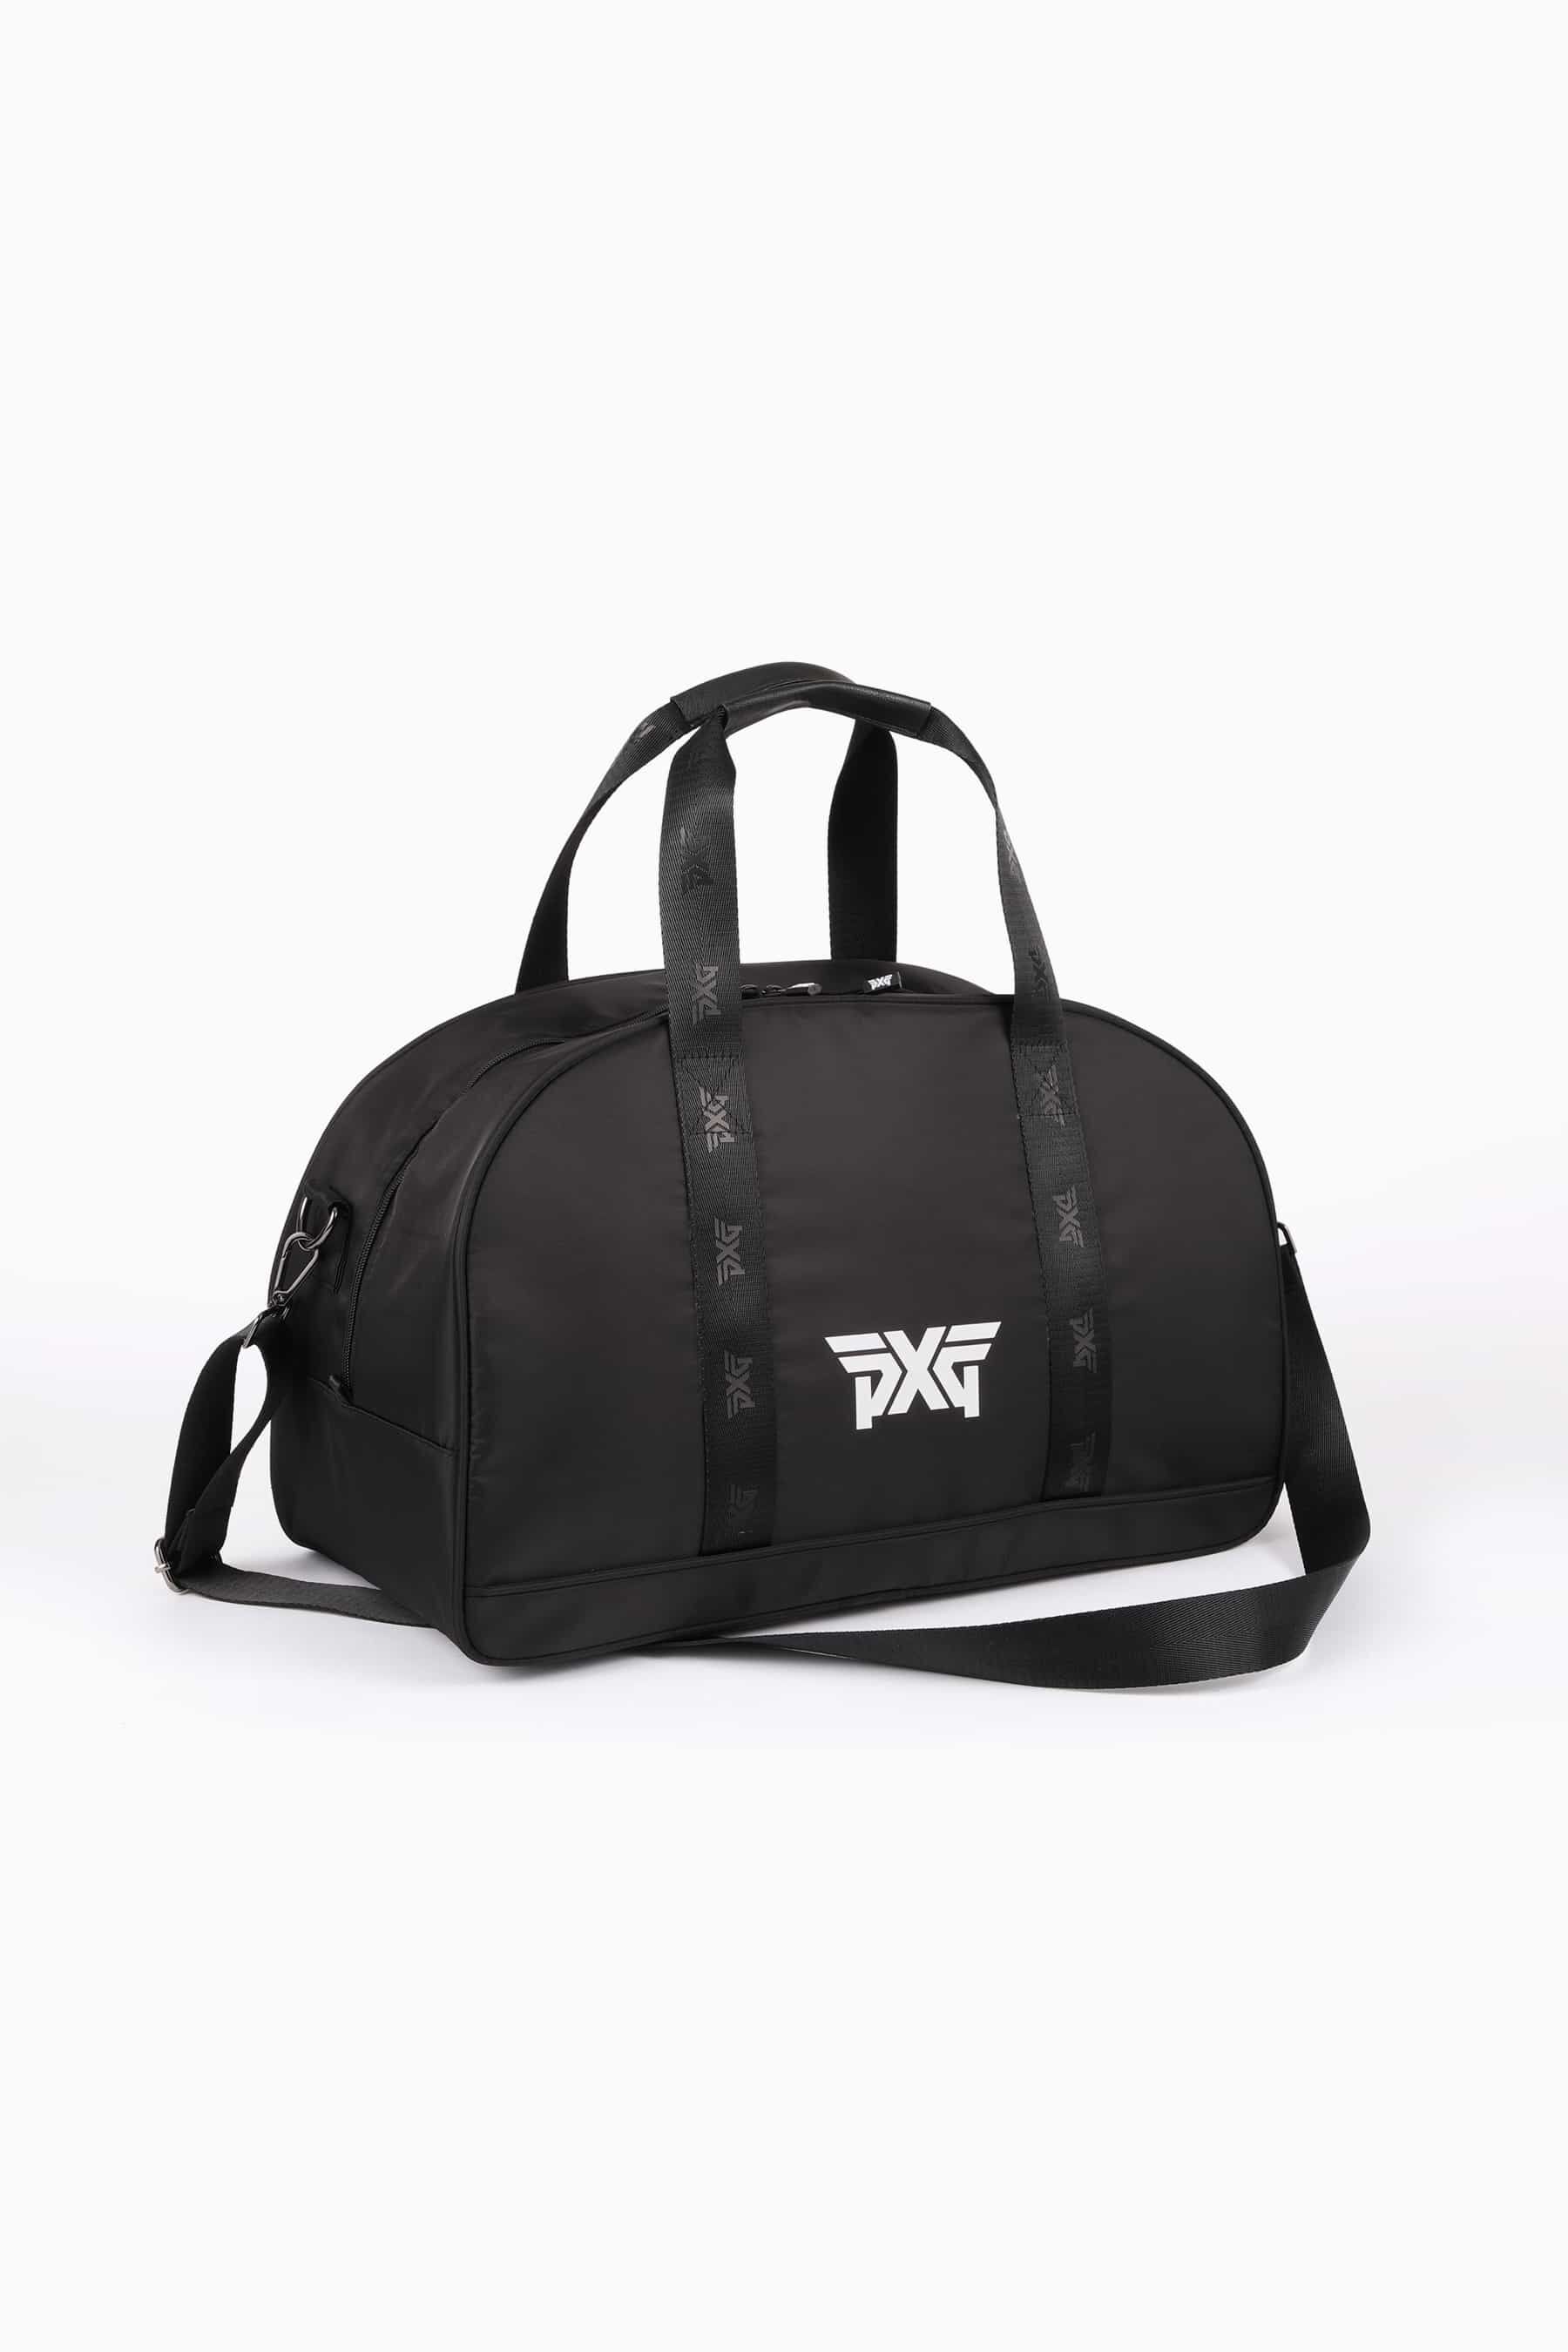 Shop PXG Accessories - Hats, Gloves, Ball Markers and More | PXG JP